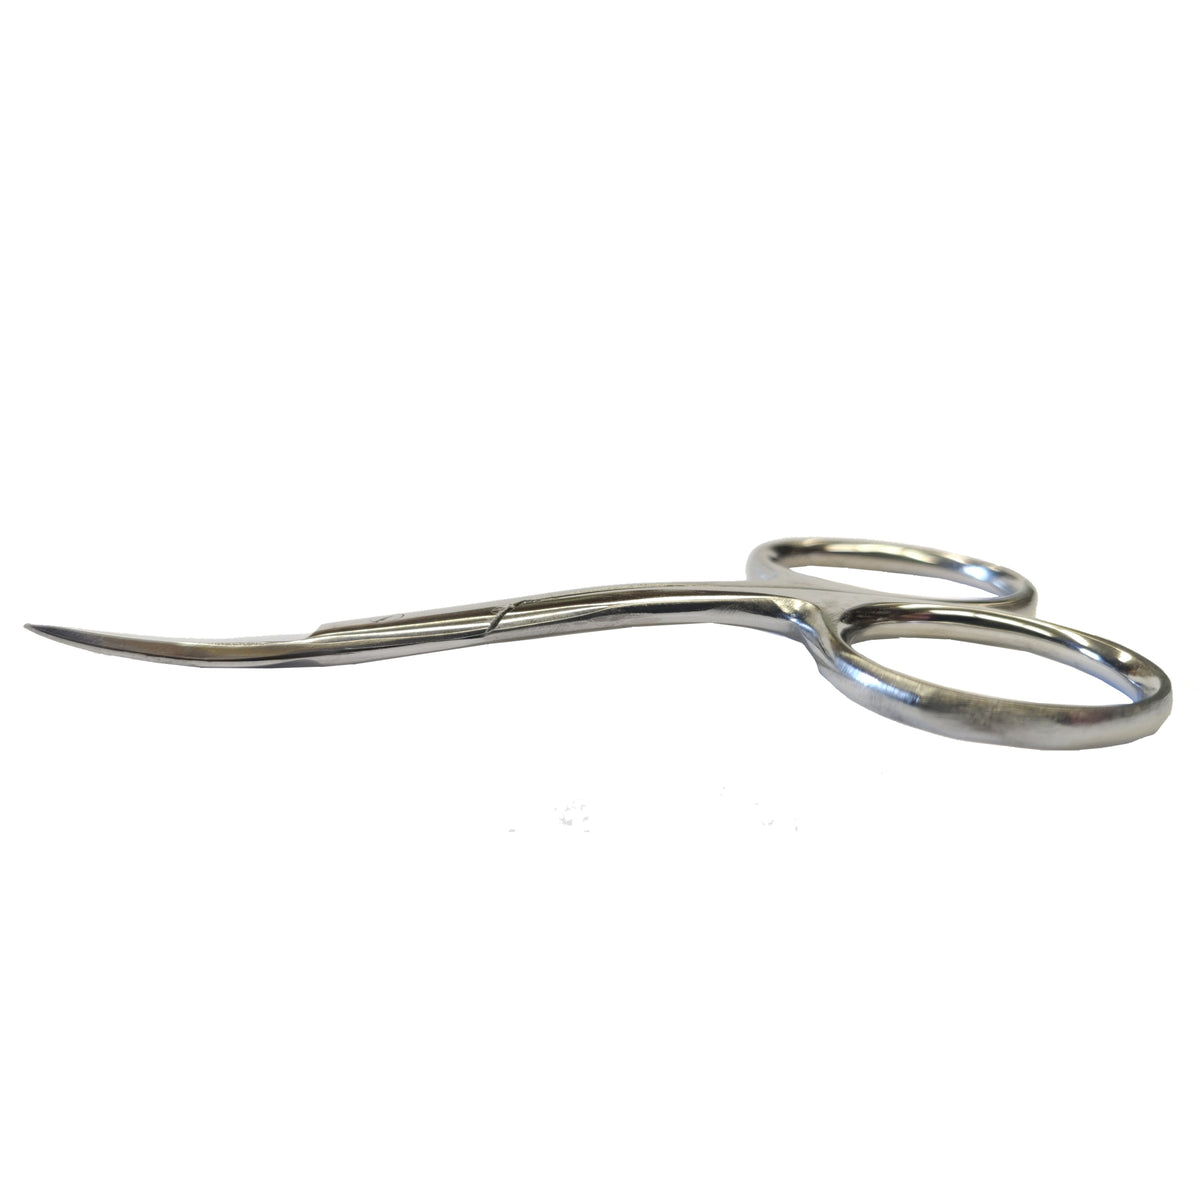 Gingher 6 Double Curved Embroidery Scissors